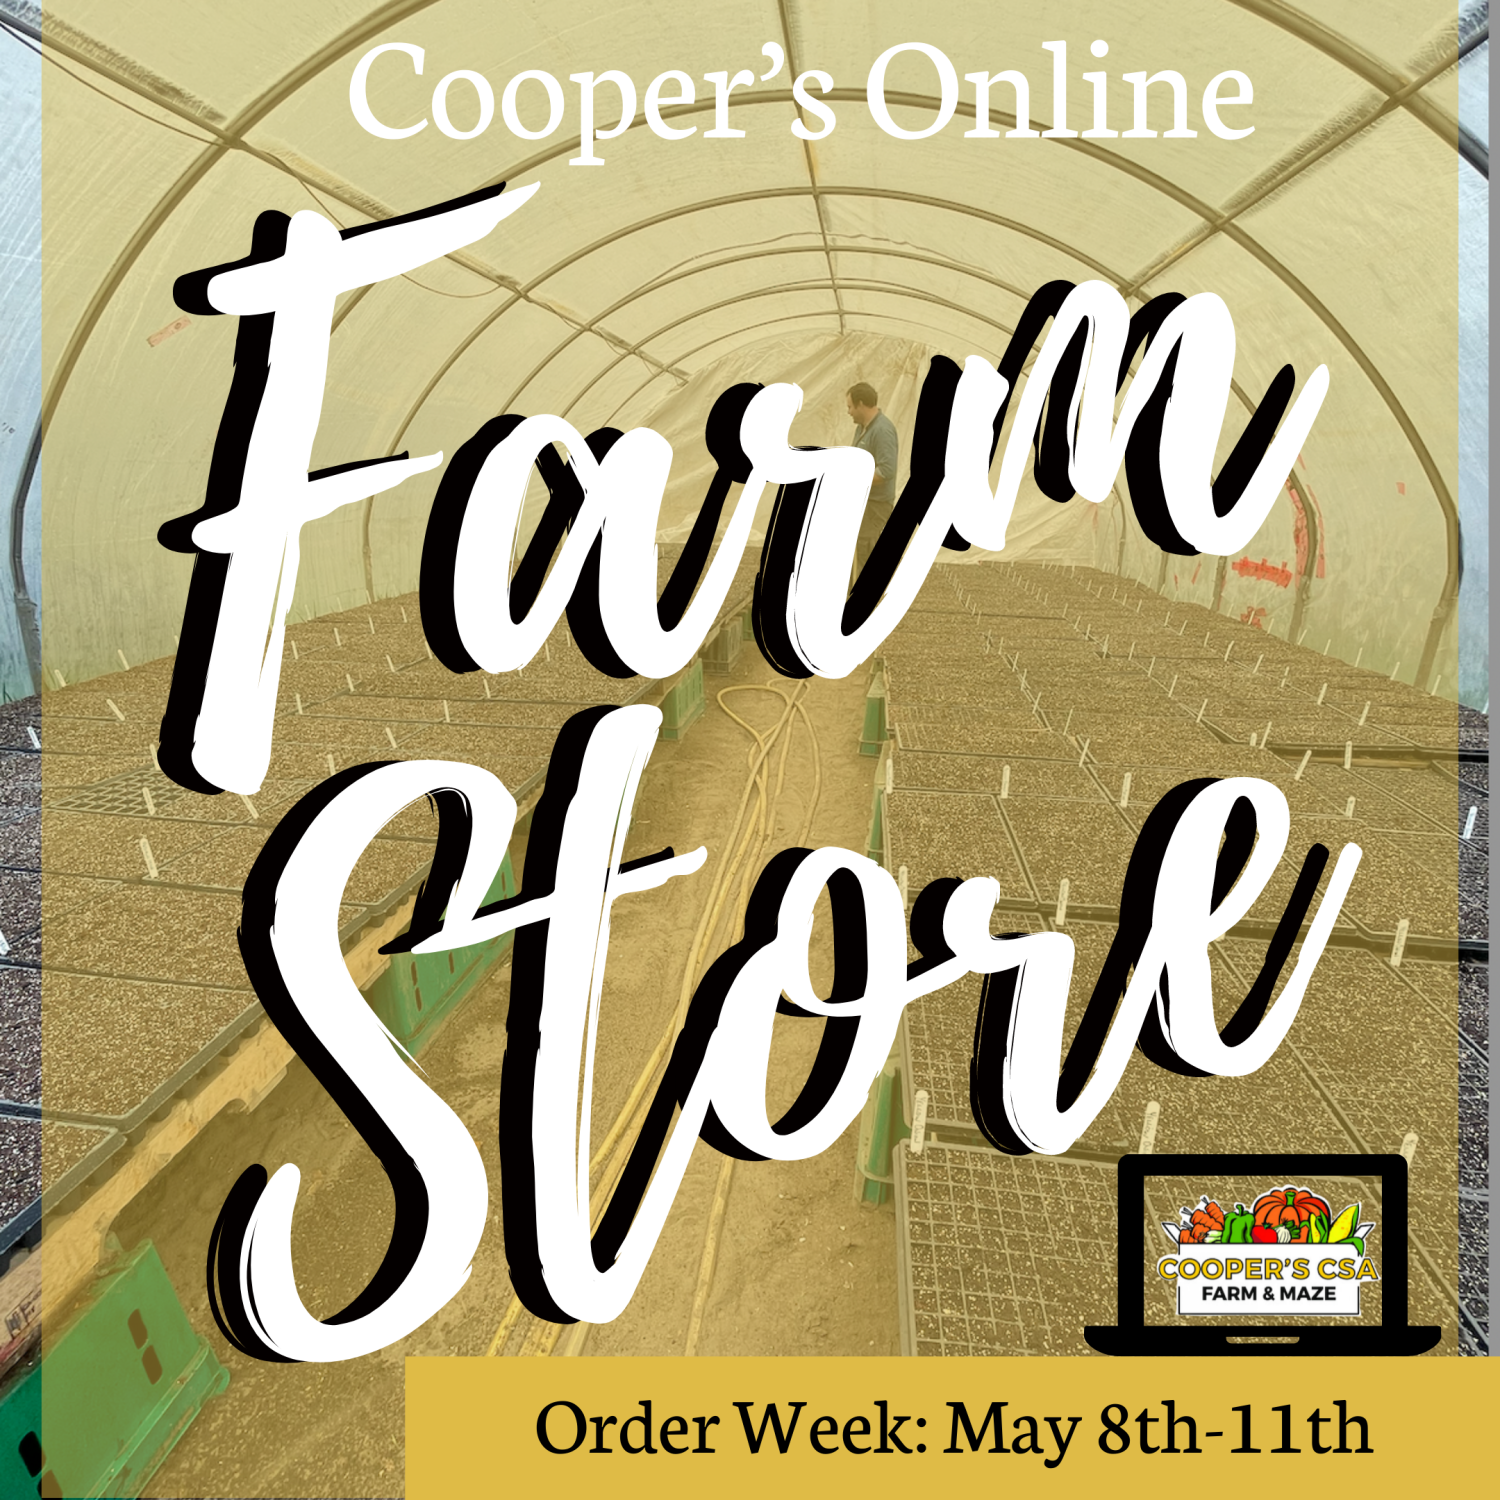 Next Happening: Coopers CSA Online FarmStore- Order week May 8th-11th